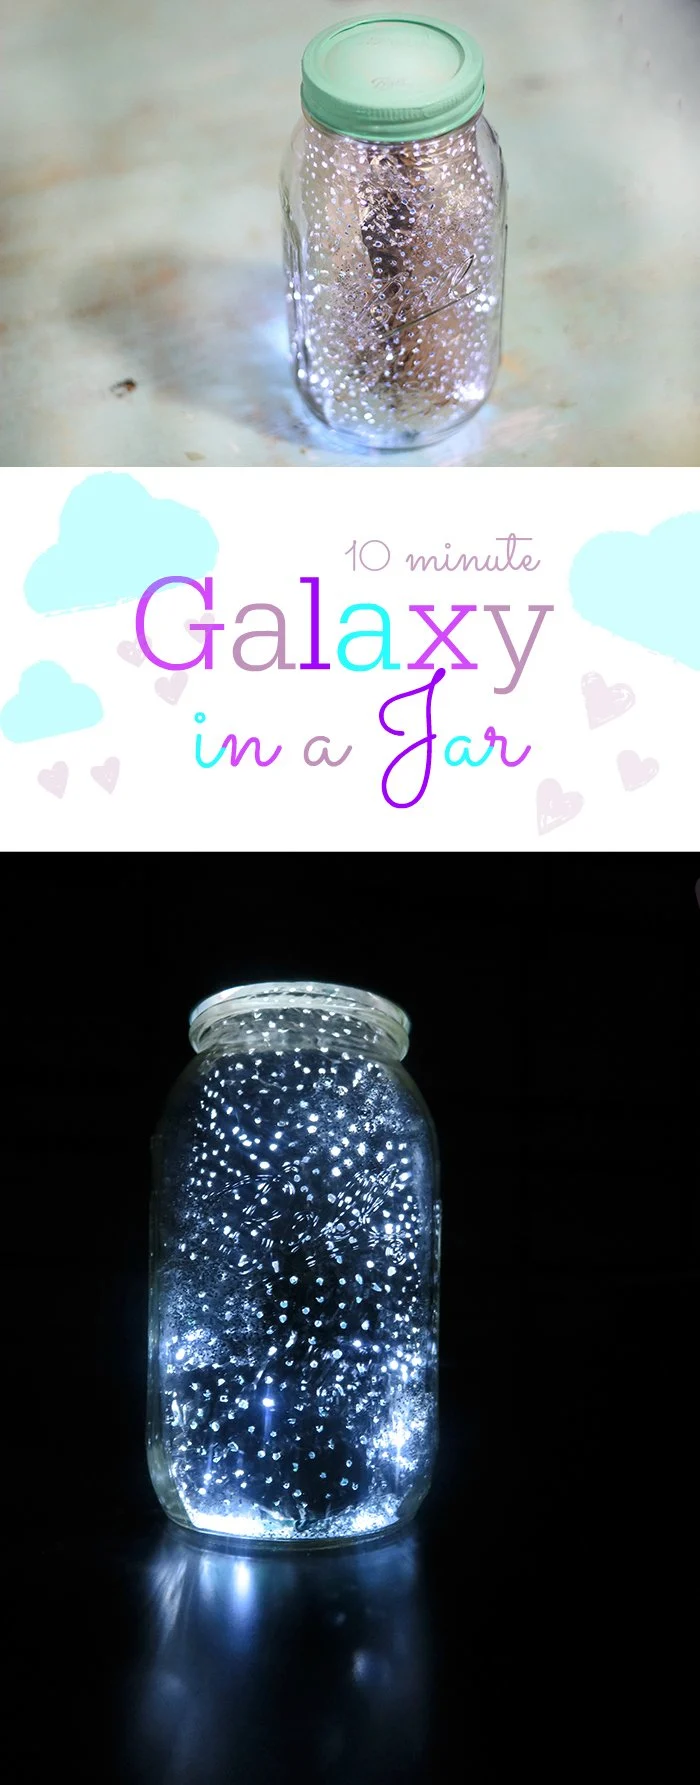 Galaxy in a jar in just 10 minutes. No paint required. This is so much fun. 